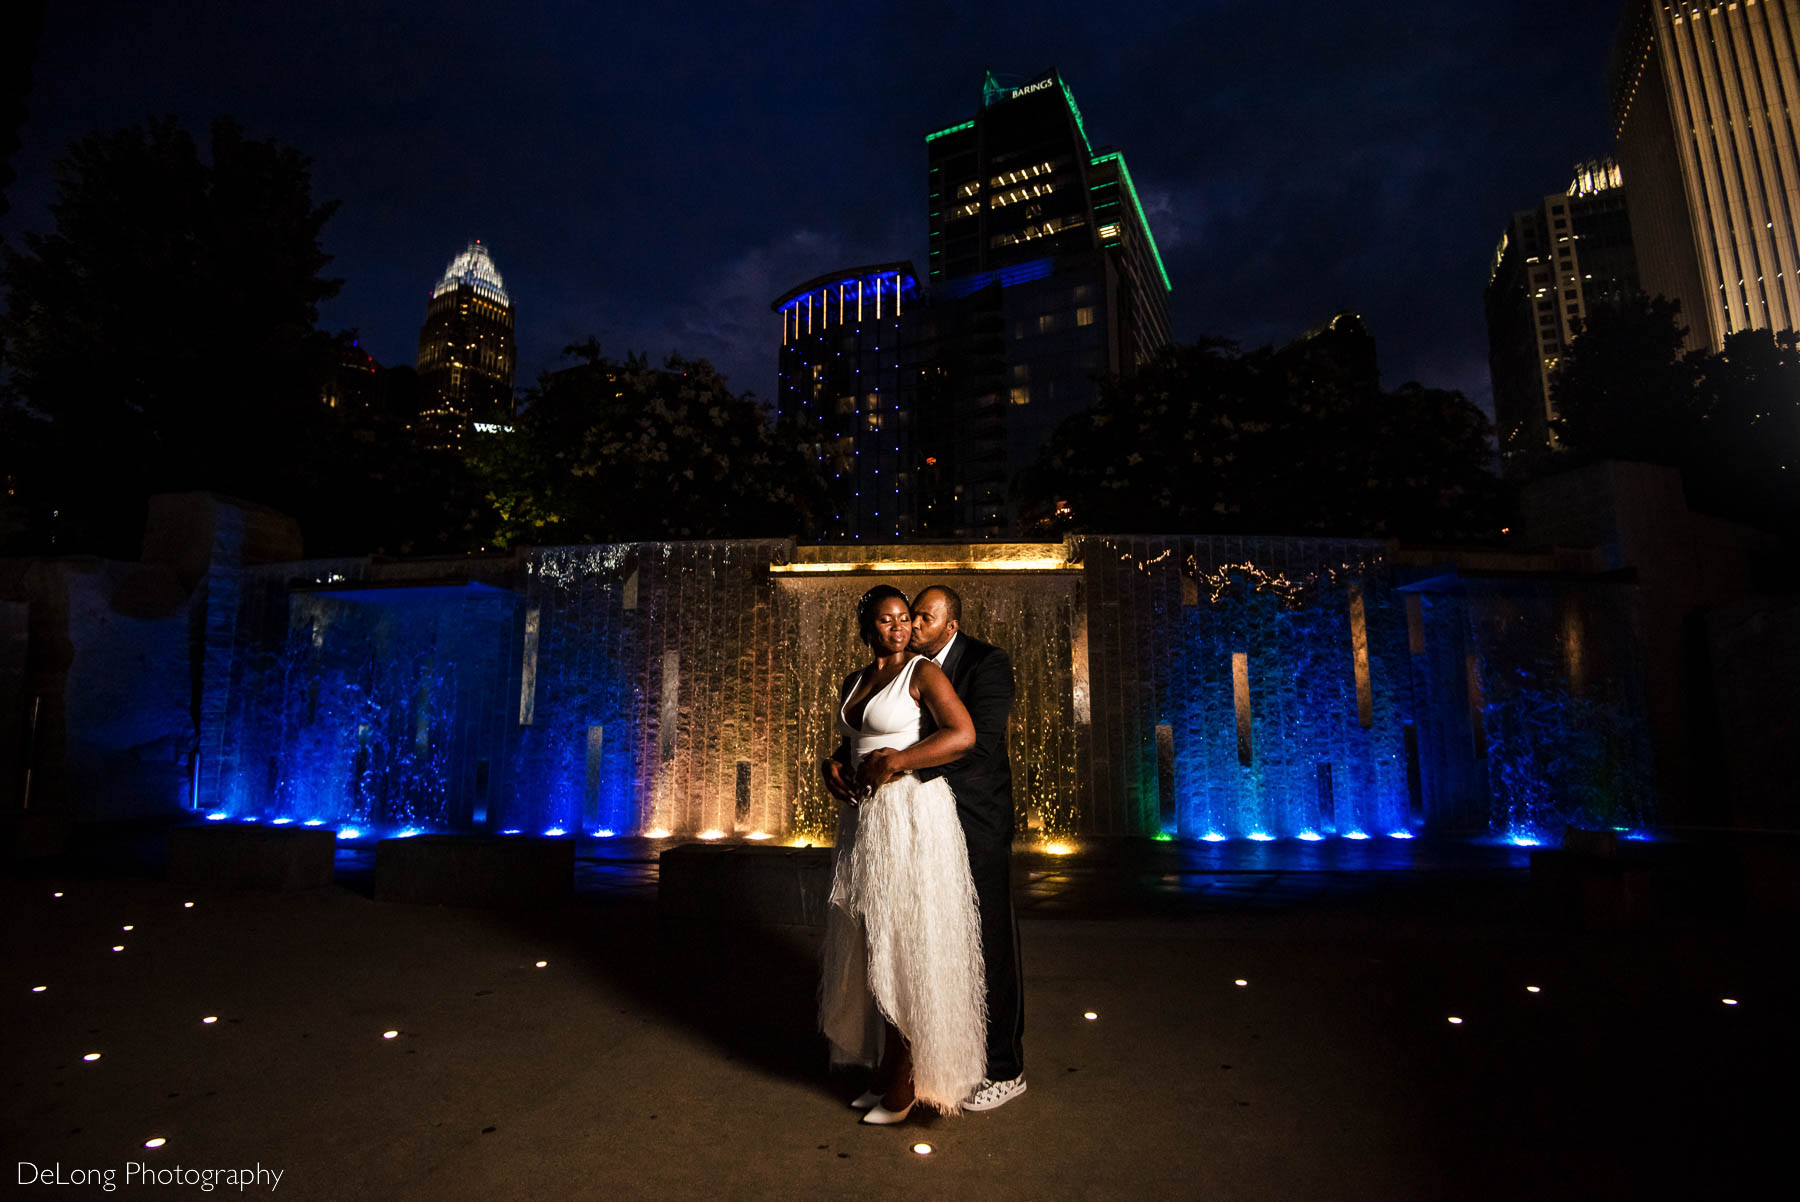 A portrait of the groom giving his bride a kiss on the cheek in front of a blue and yellow water feature at Romare Bearden Park in Uptown Charlotte, NC by Charlotte wedding photographers DeLong Photography